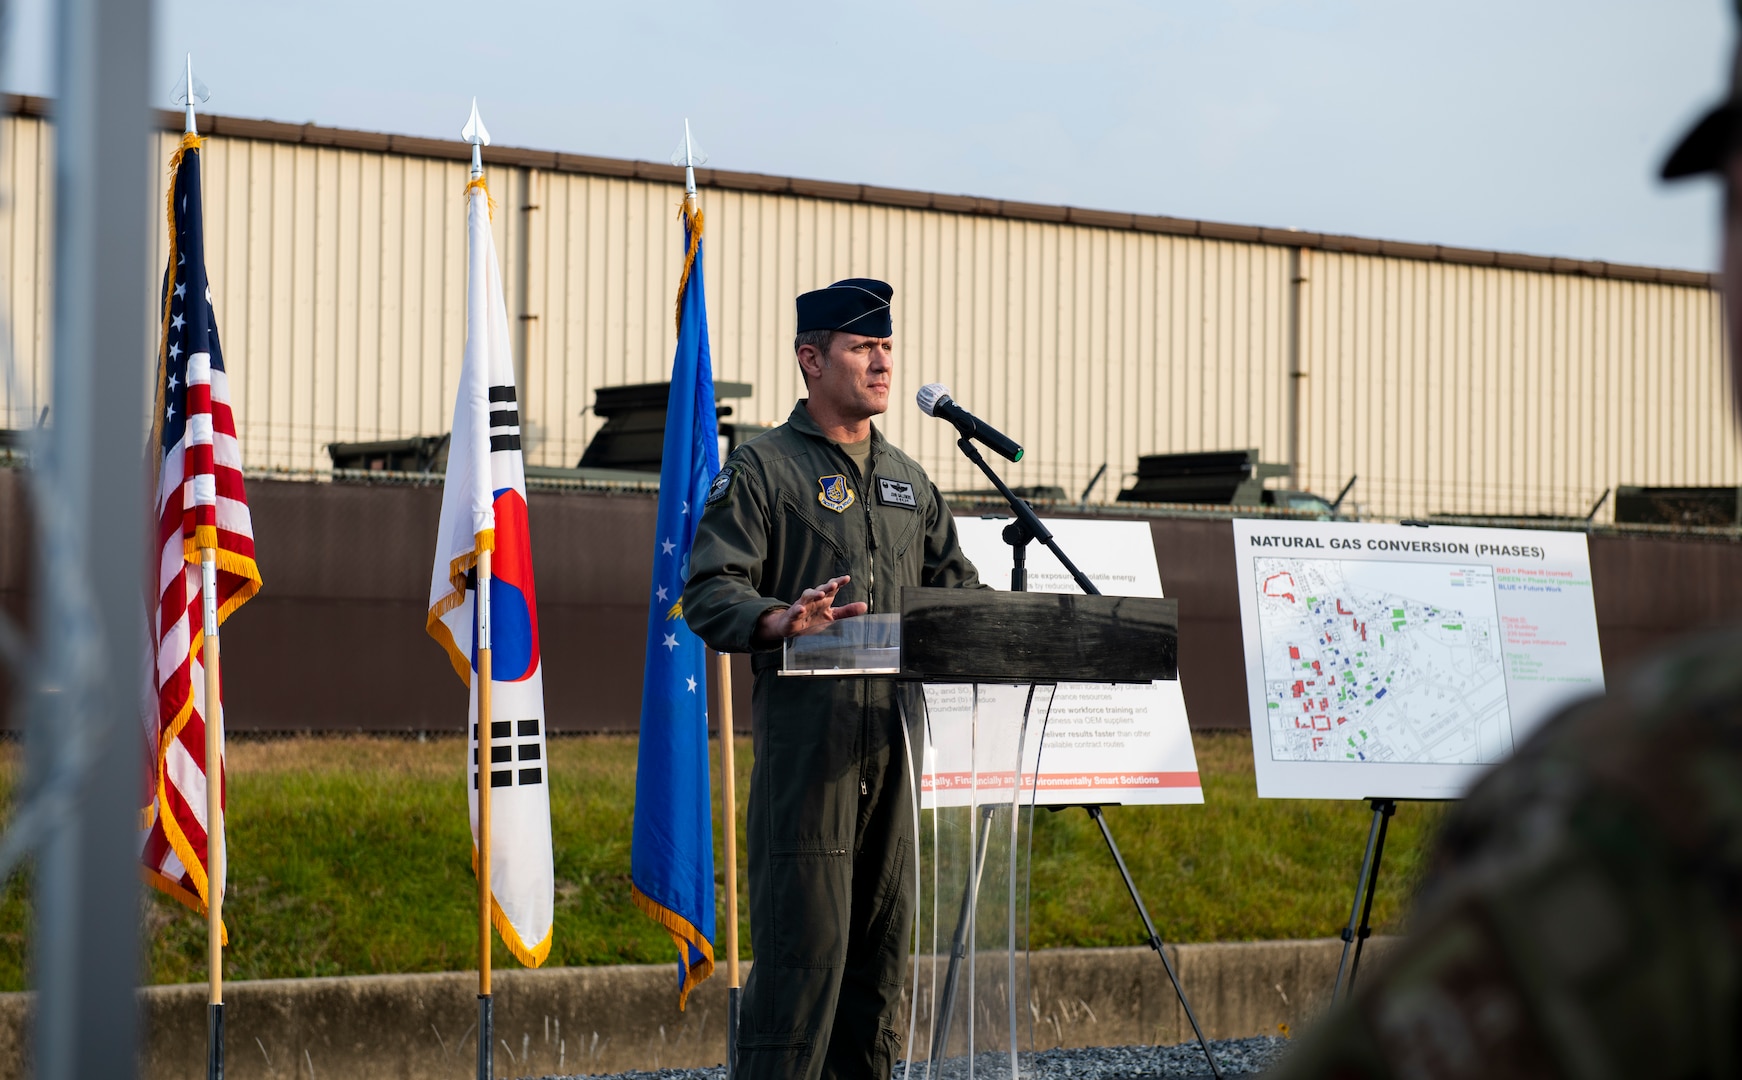 Col. John “Wolf” Gallemore, 8th Fighter Wing commander, provides remarks during the installation’s Natural Gas Ribbon Cutting Ceremony at Kunsan Air Base, Republic of Korea, Nov. 15, 2021.The pipeline is now providing heating to two dormitories that house approximately 450 Airmen. (U.S. Air Force photo by Staff Sgt. Suzie Plotnikov)